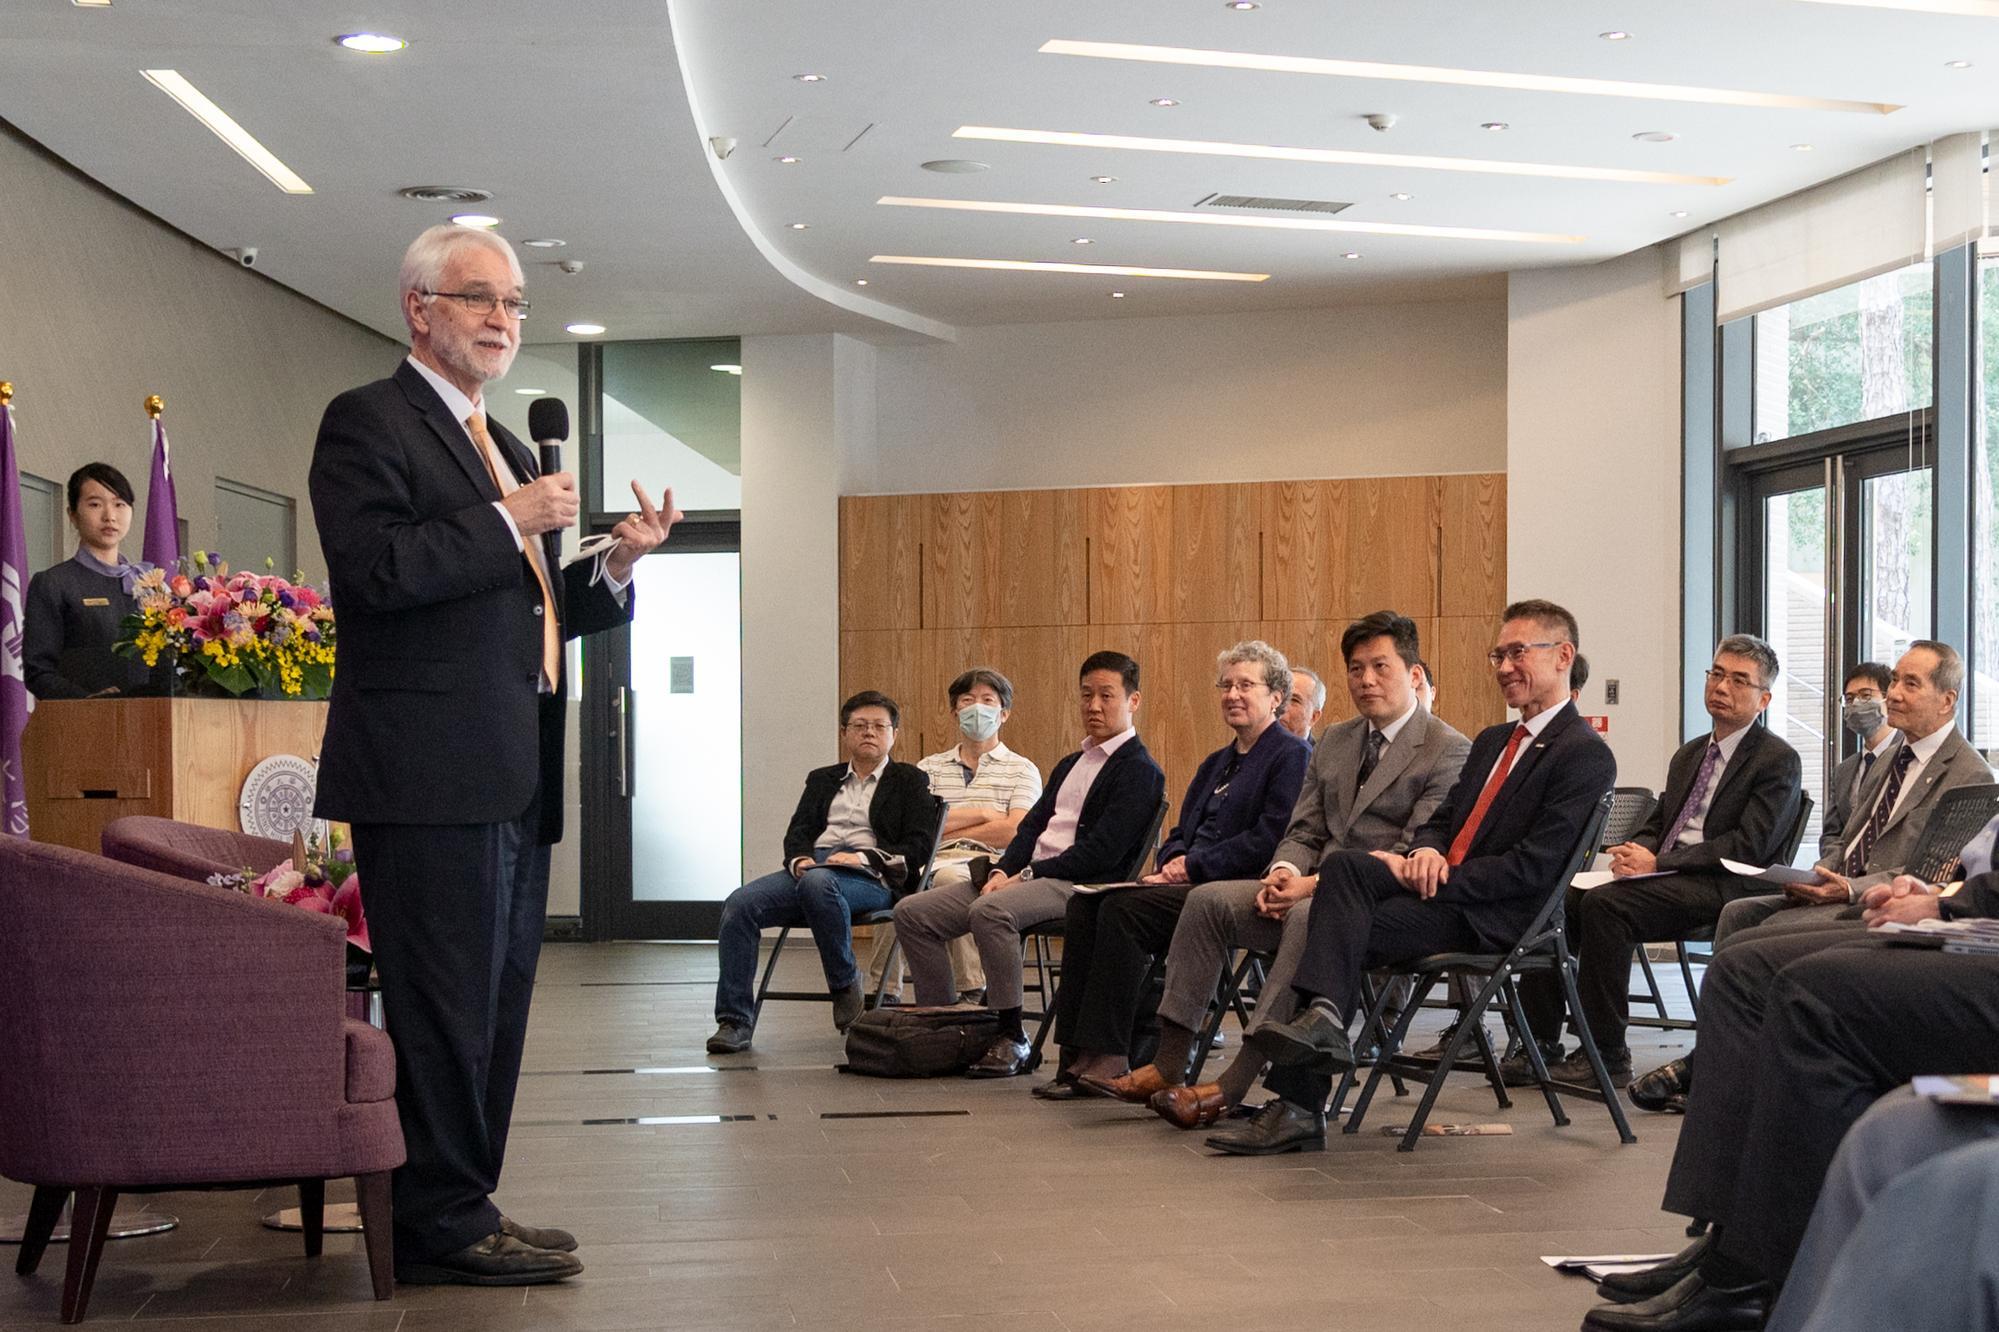 University of Illinois System president Timothy L. Killeen led a delegation of 8 people including the Vice President to visit NTHU.